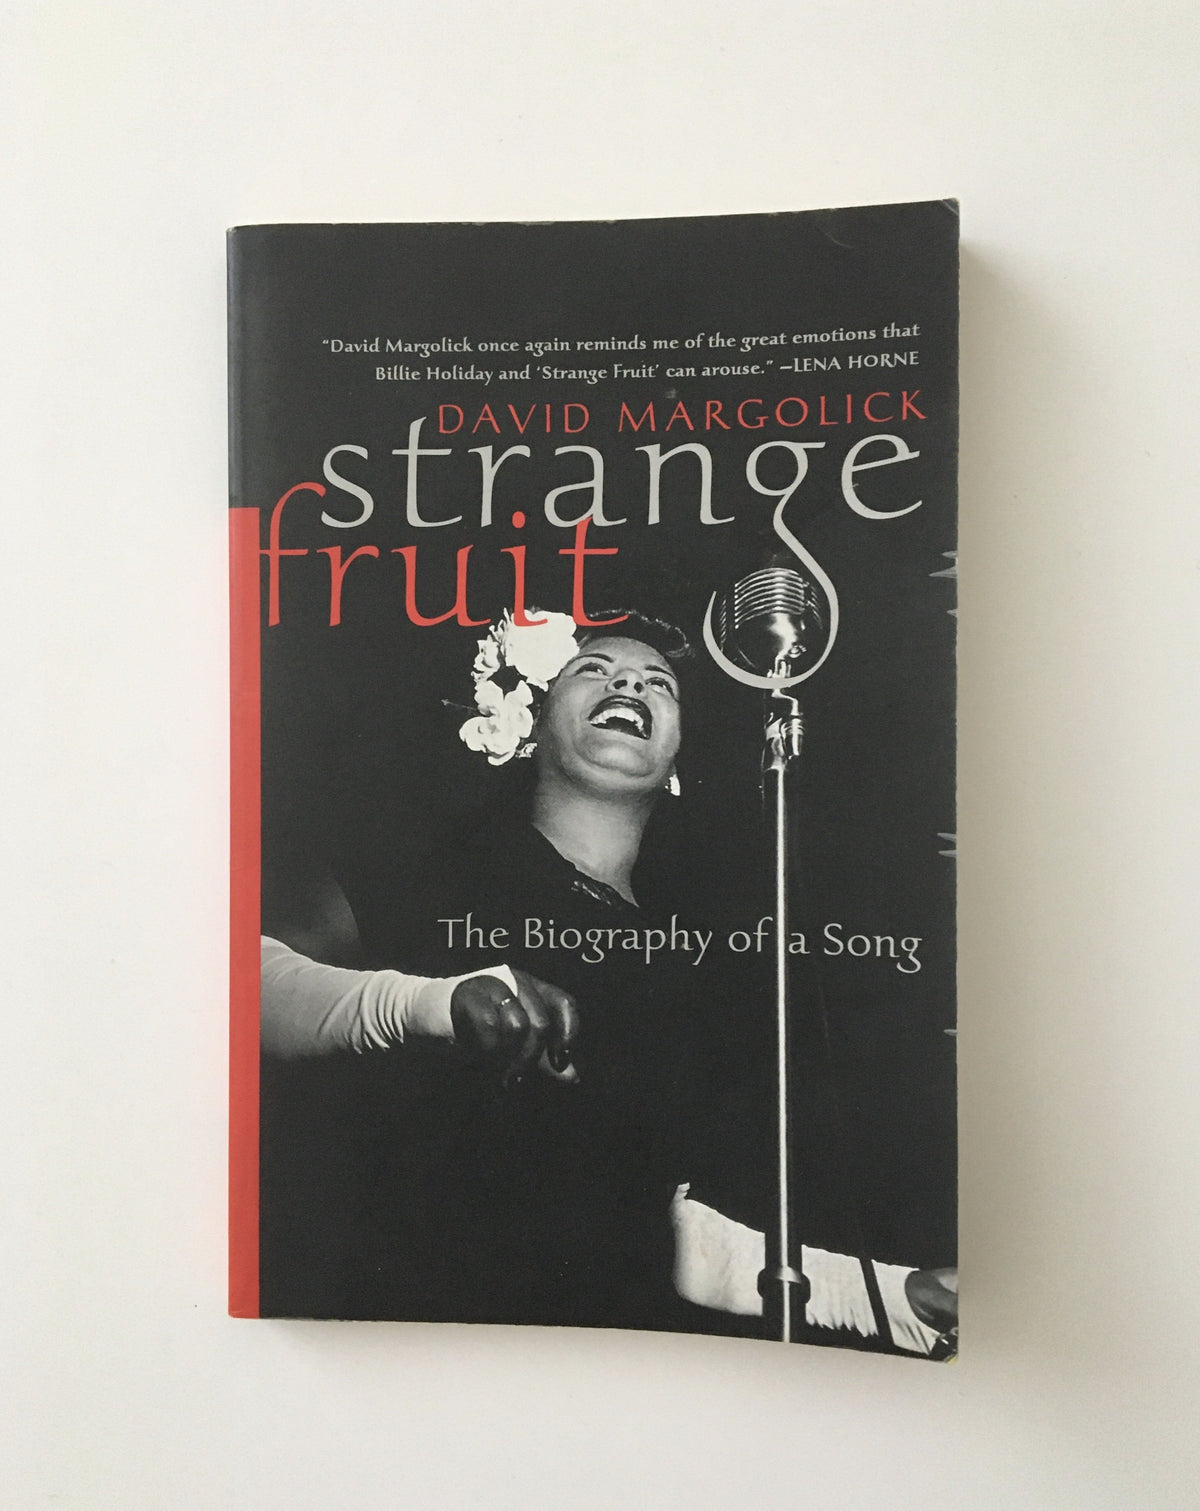 Strange Fruit: Billie Holiday and the Biography of a Song by David Margolick, book, Ten Dollar Books, Ten Dollar Books